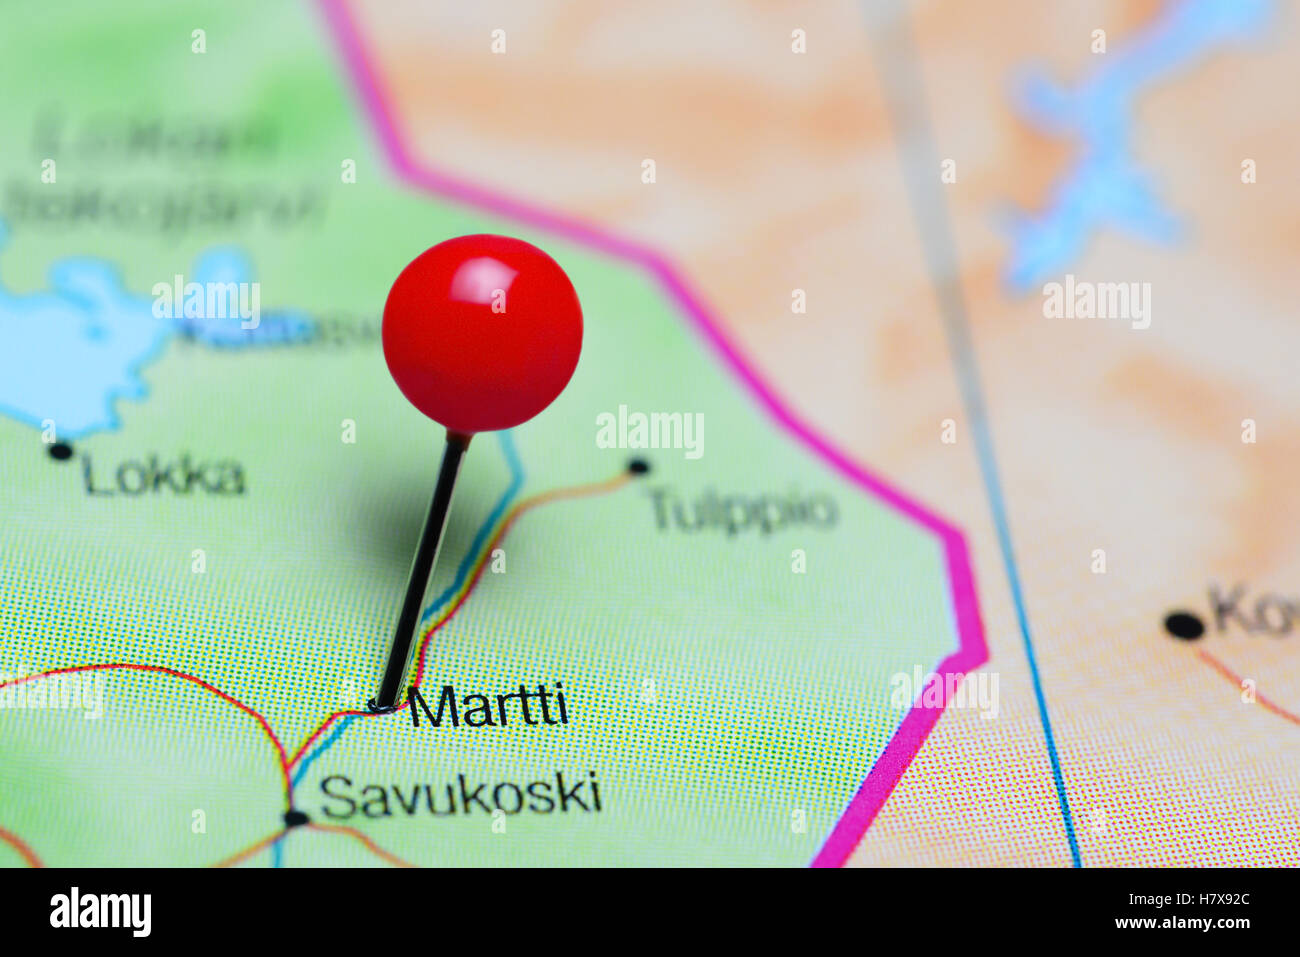 Martti pinned on a map of Finland Stock Photo